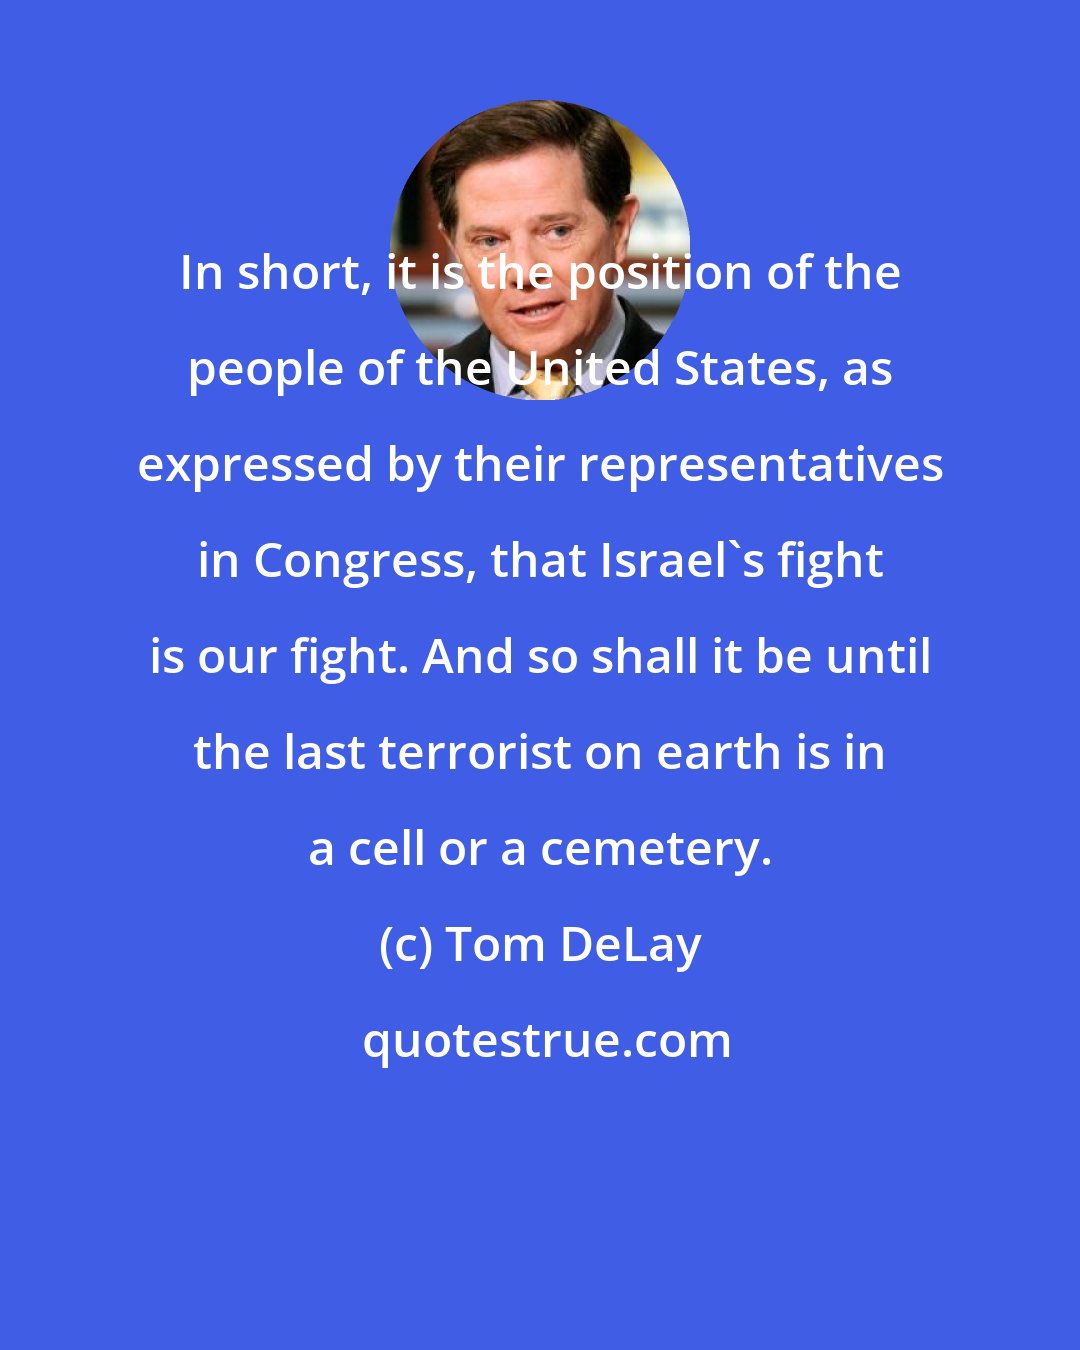 Tom DeLay: In short, it is the position of the people of the United States, as expressed by their representatives in Congress, that Israel's fight is our fight. And so shall it be until the last terrorist on earth is in a cell or a cemetery.